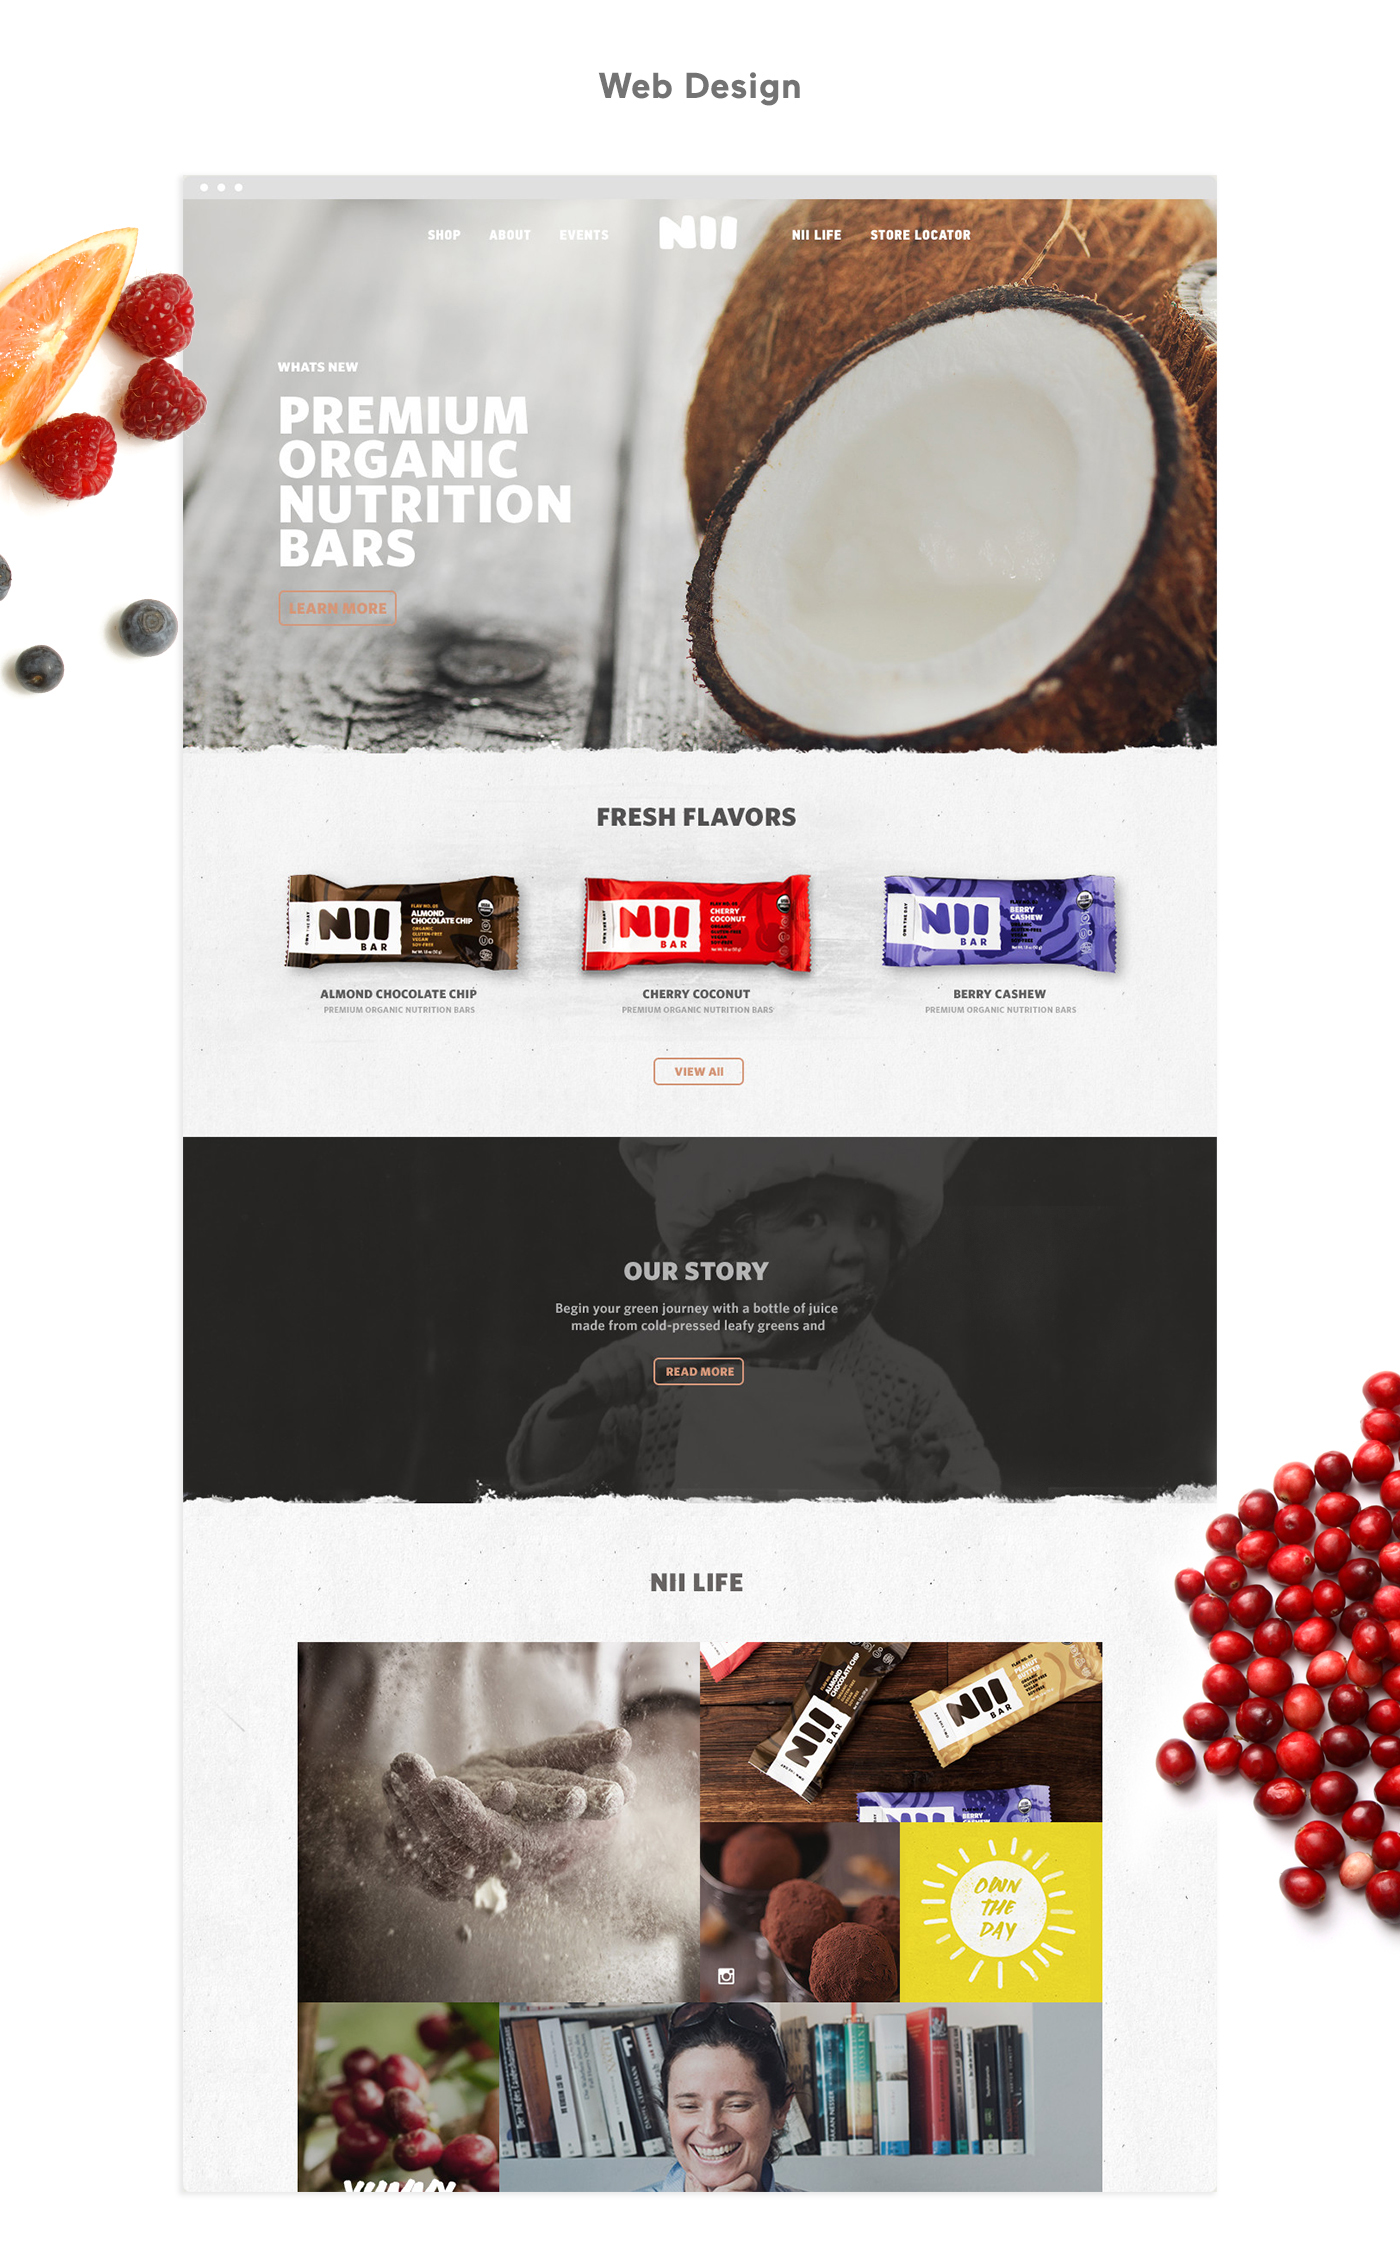 nii Nii Bar health foods nutrition package design  Brand Design Brand Development health food bars Campaign messaging campaign